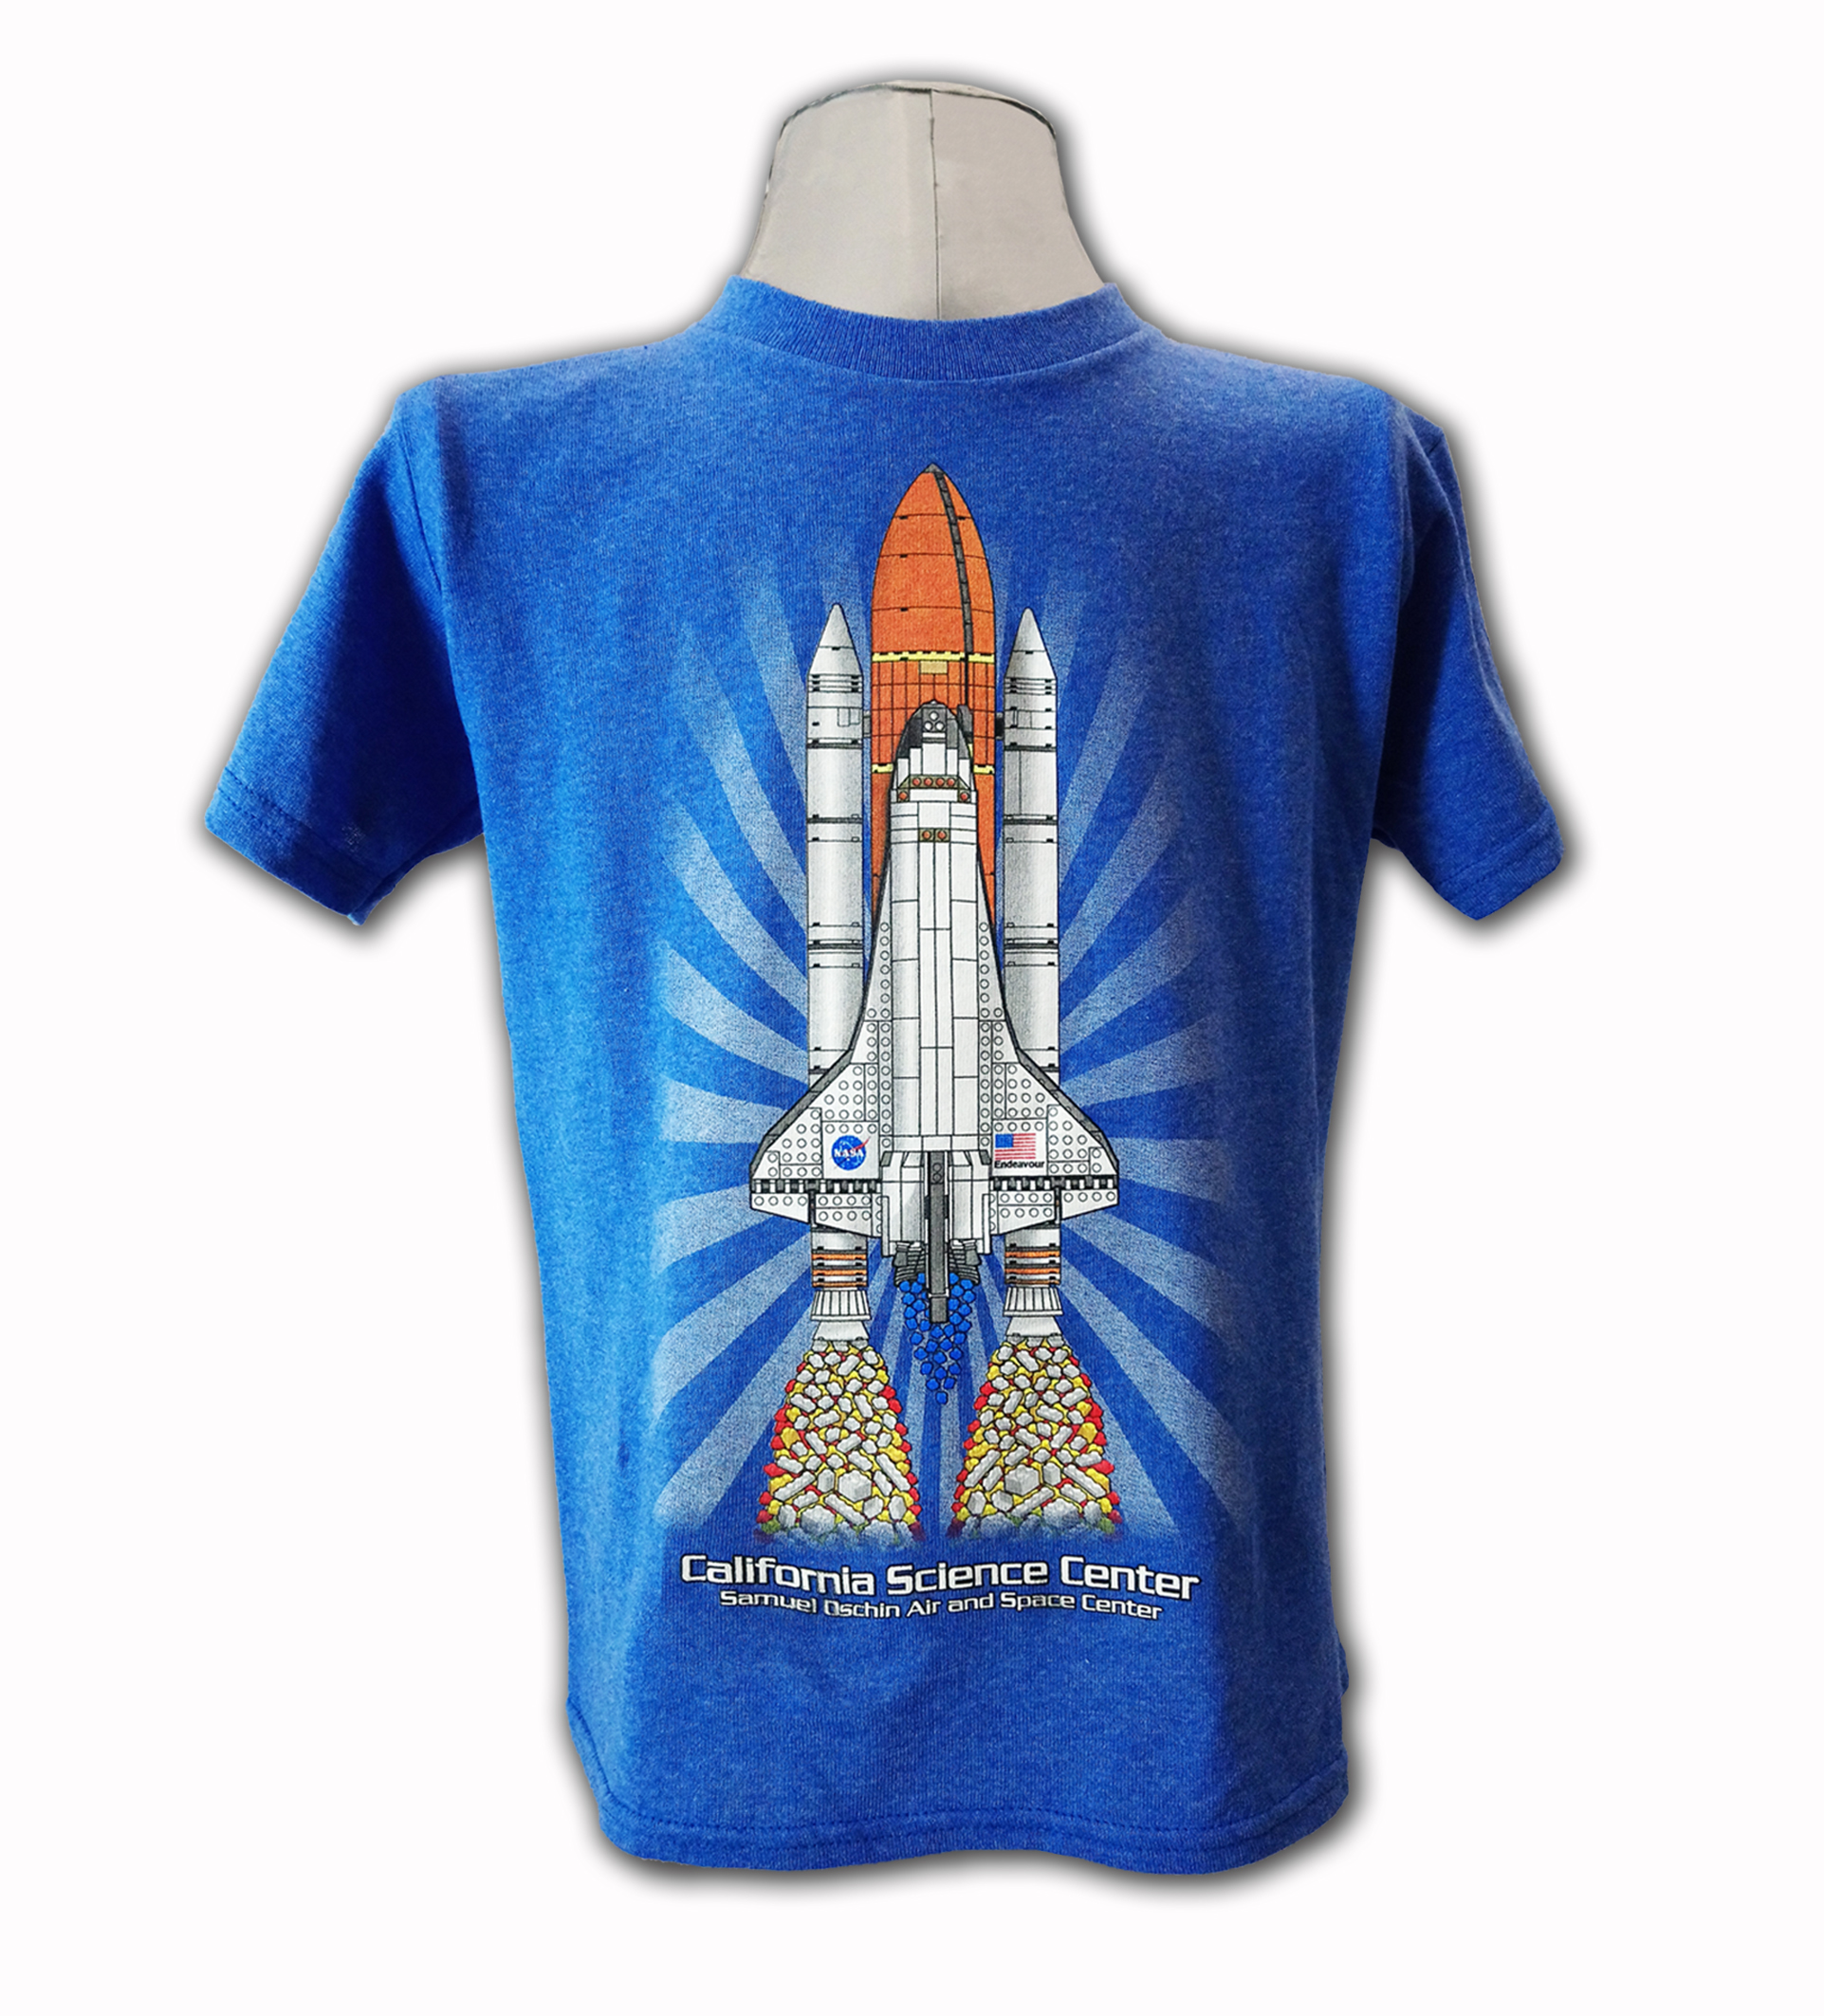 ExploraStore product of a t-shirt of Endeavour design with bricks